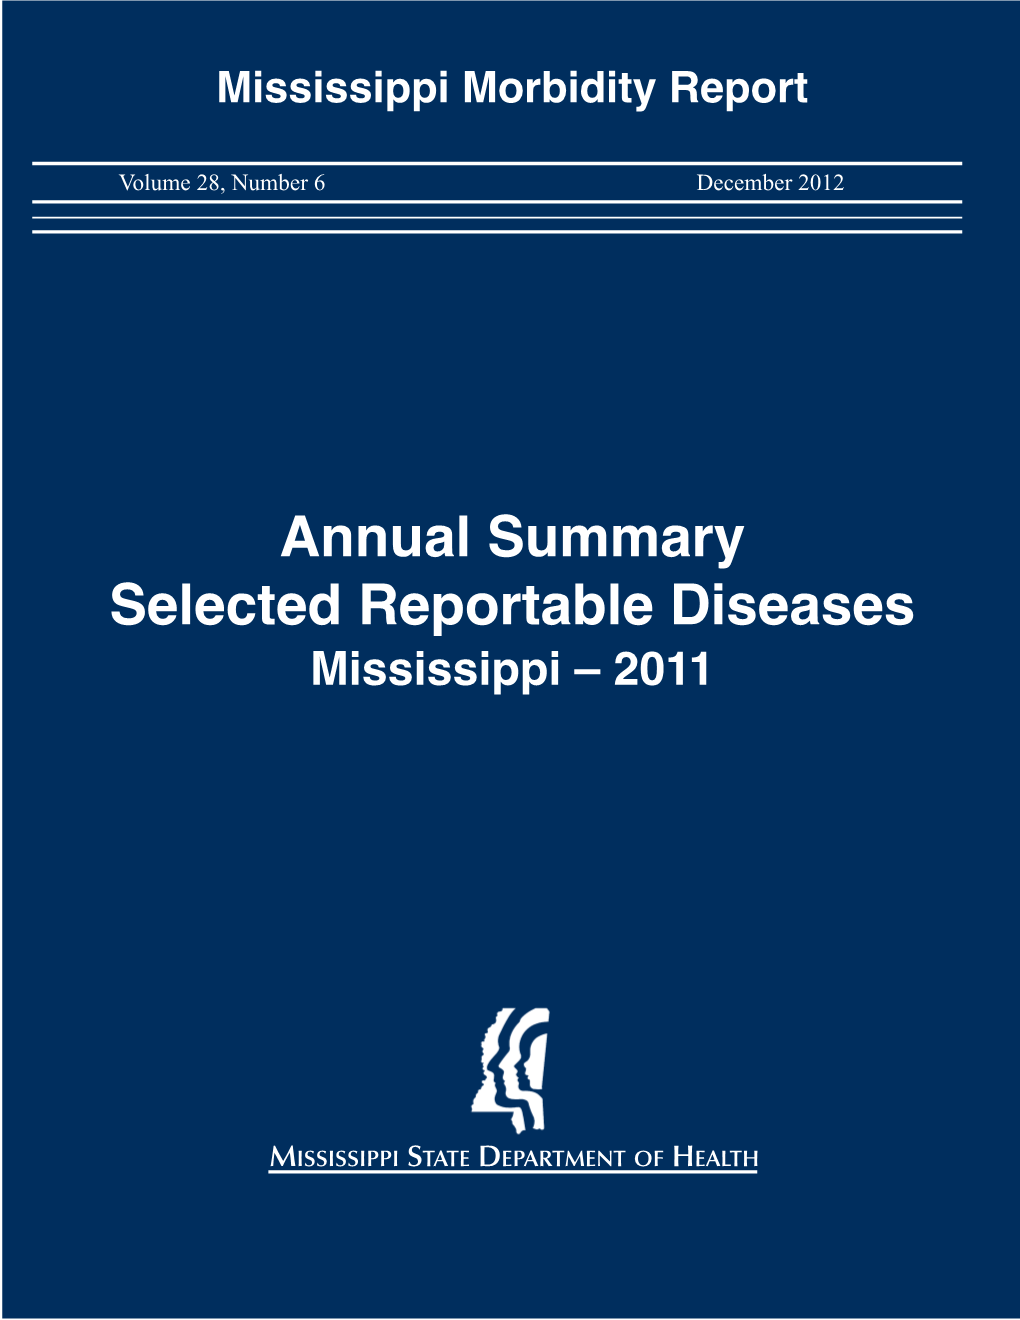 Annual Summary Selected Reportable Diseases Mississippi – 2011